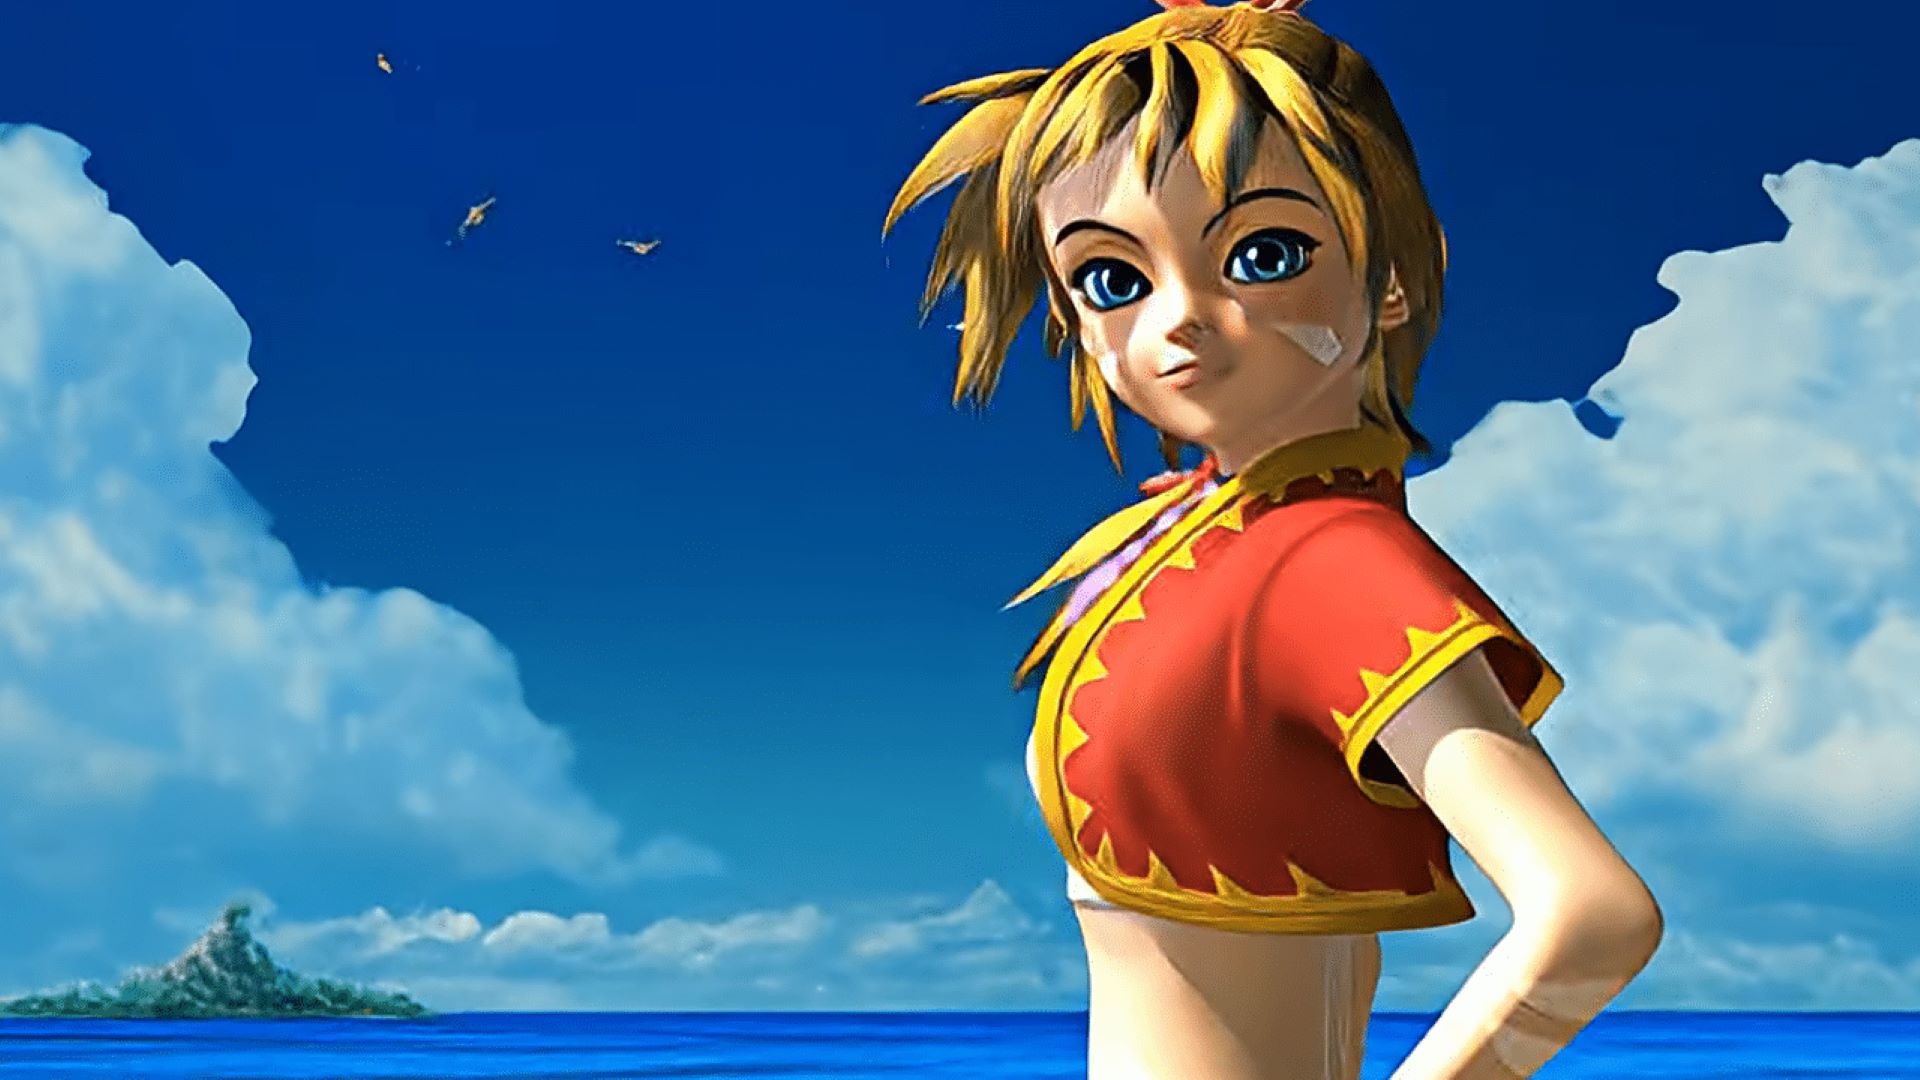 Image for Chrono Cross was remastered so it wouldn't become "unplayable"